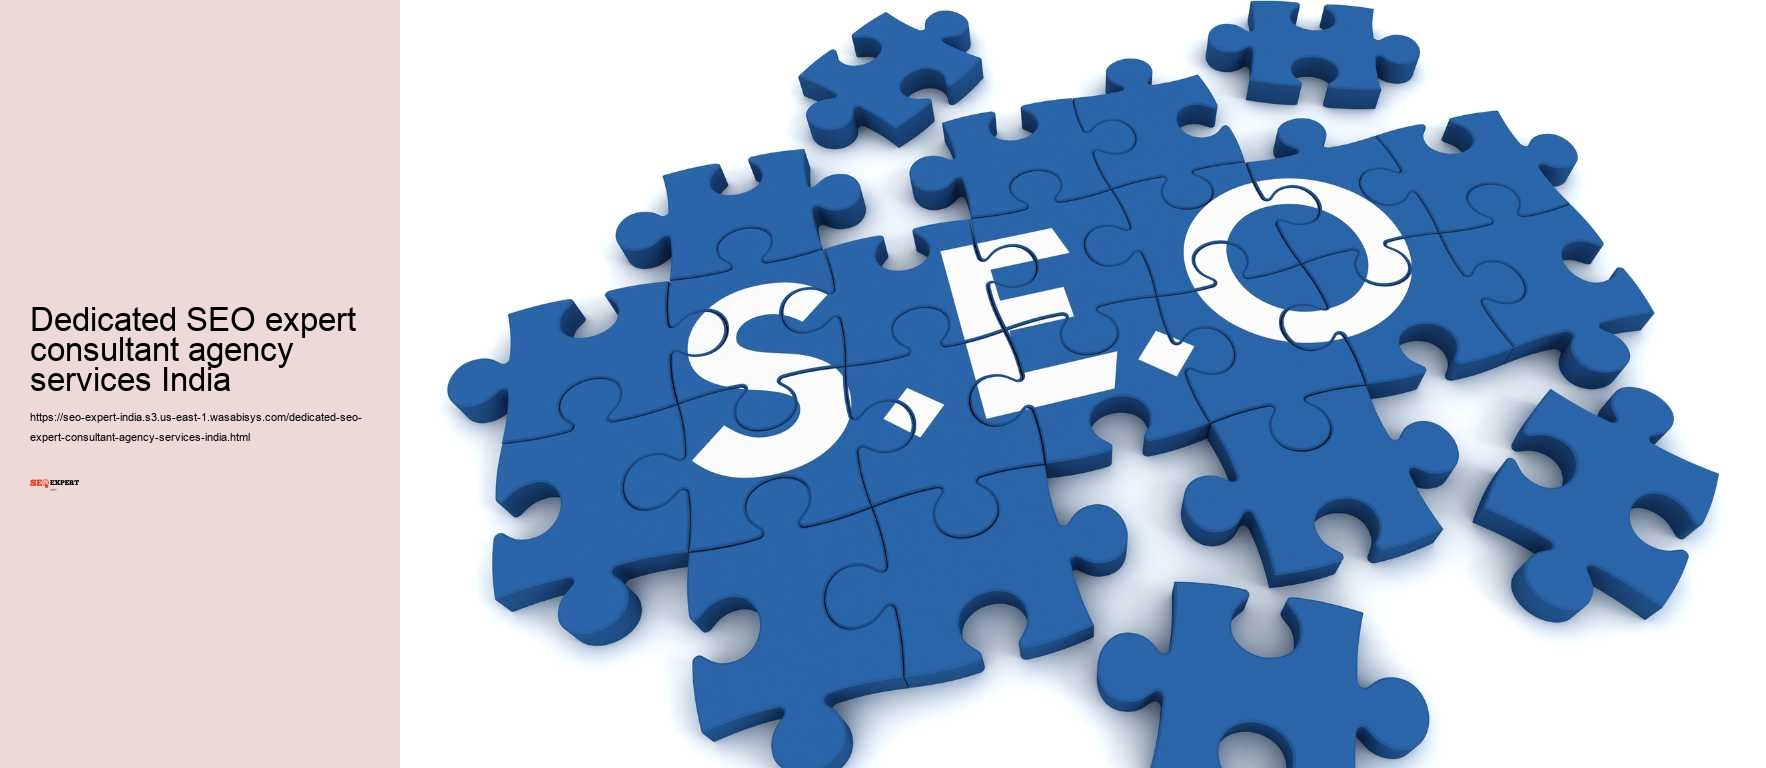 Dedicated SEO expert consultant agency services India